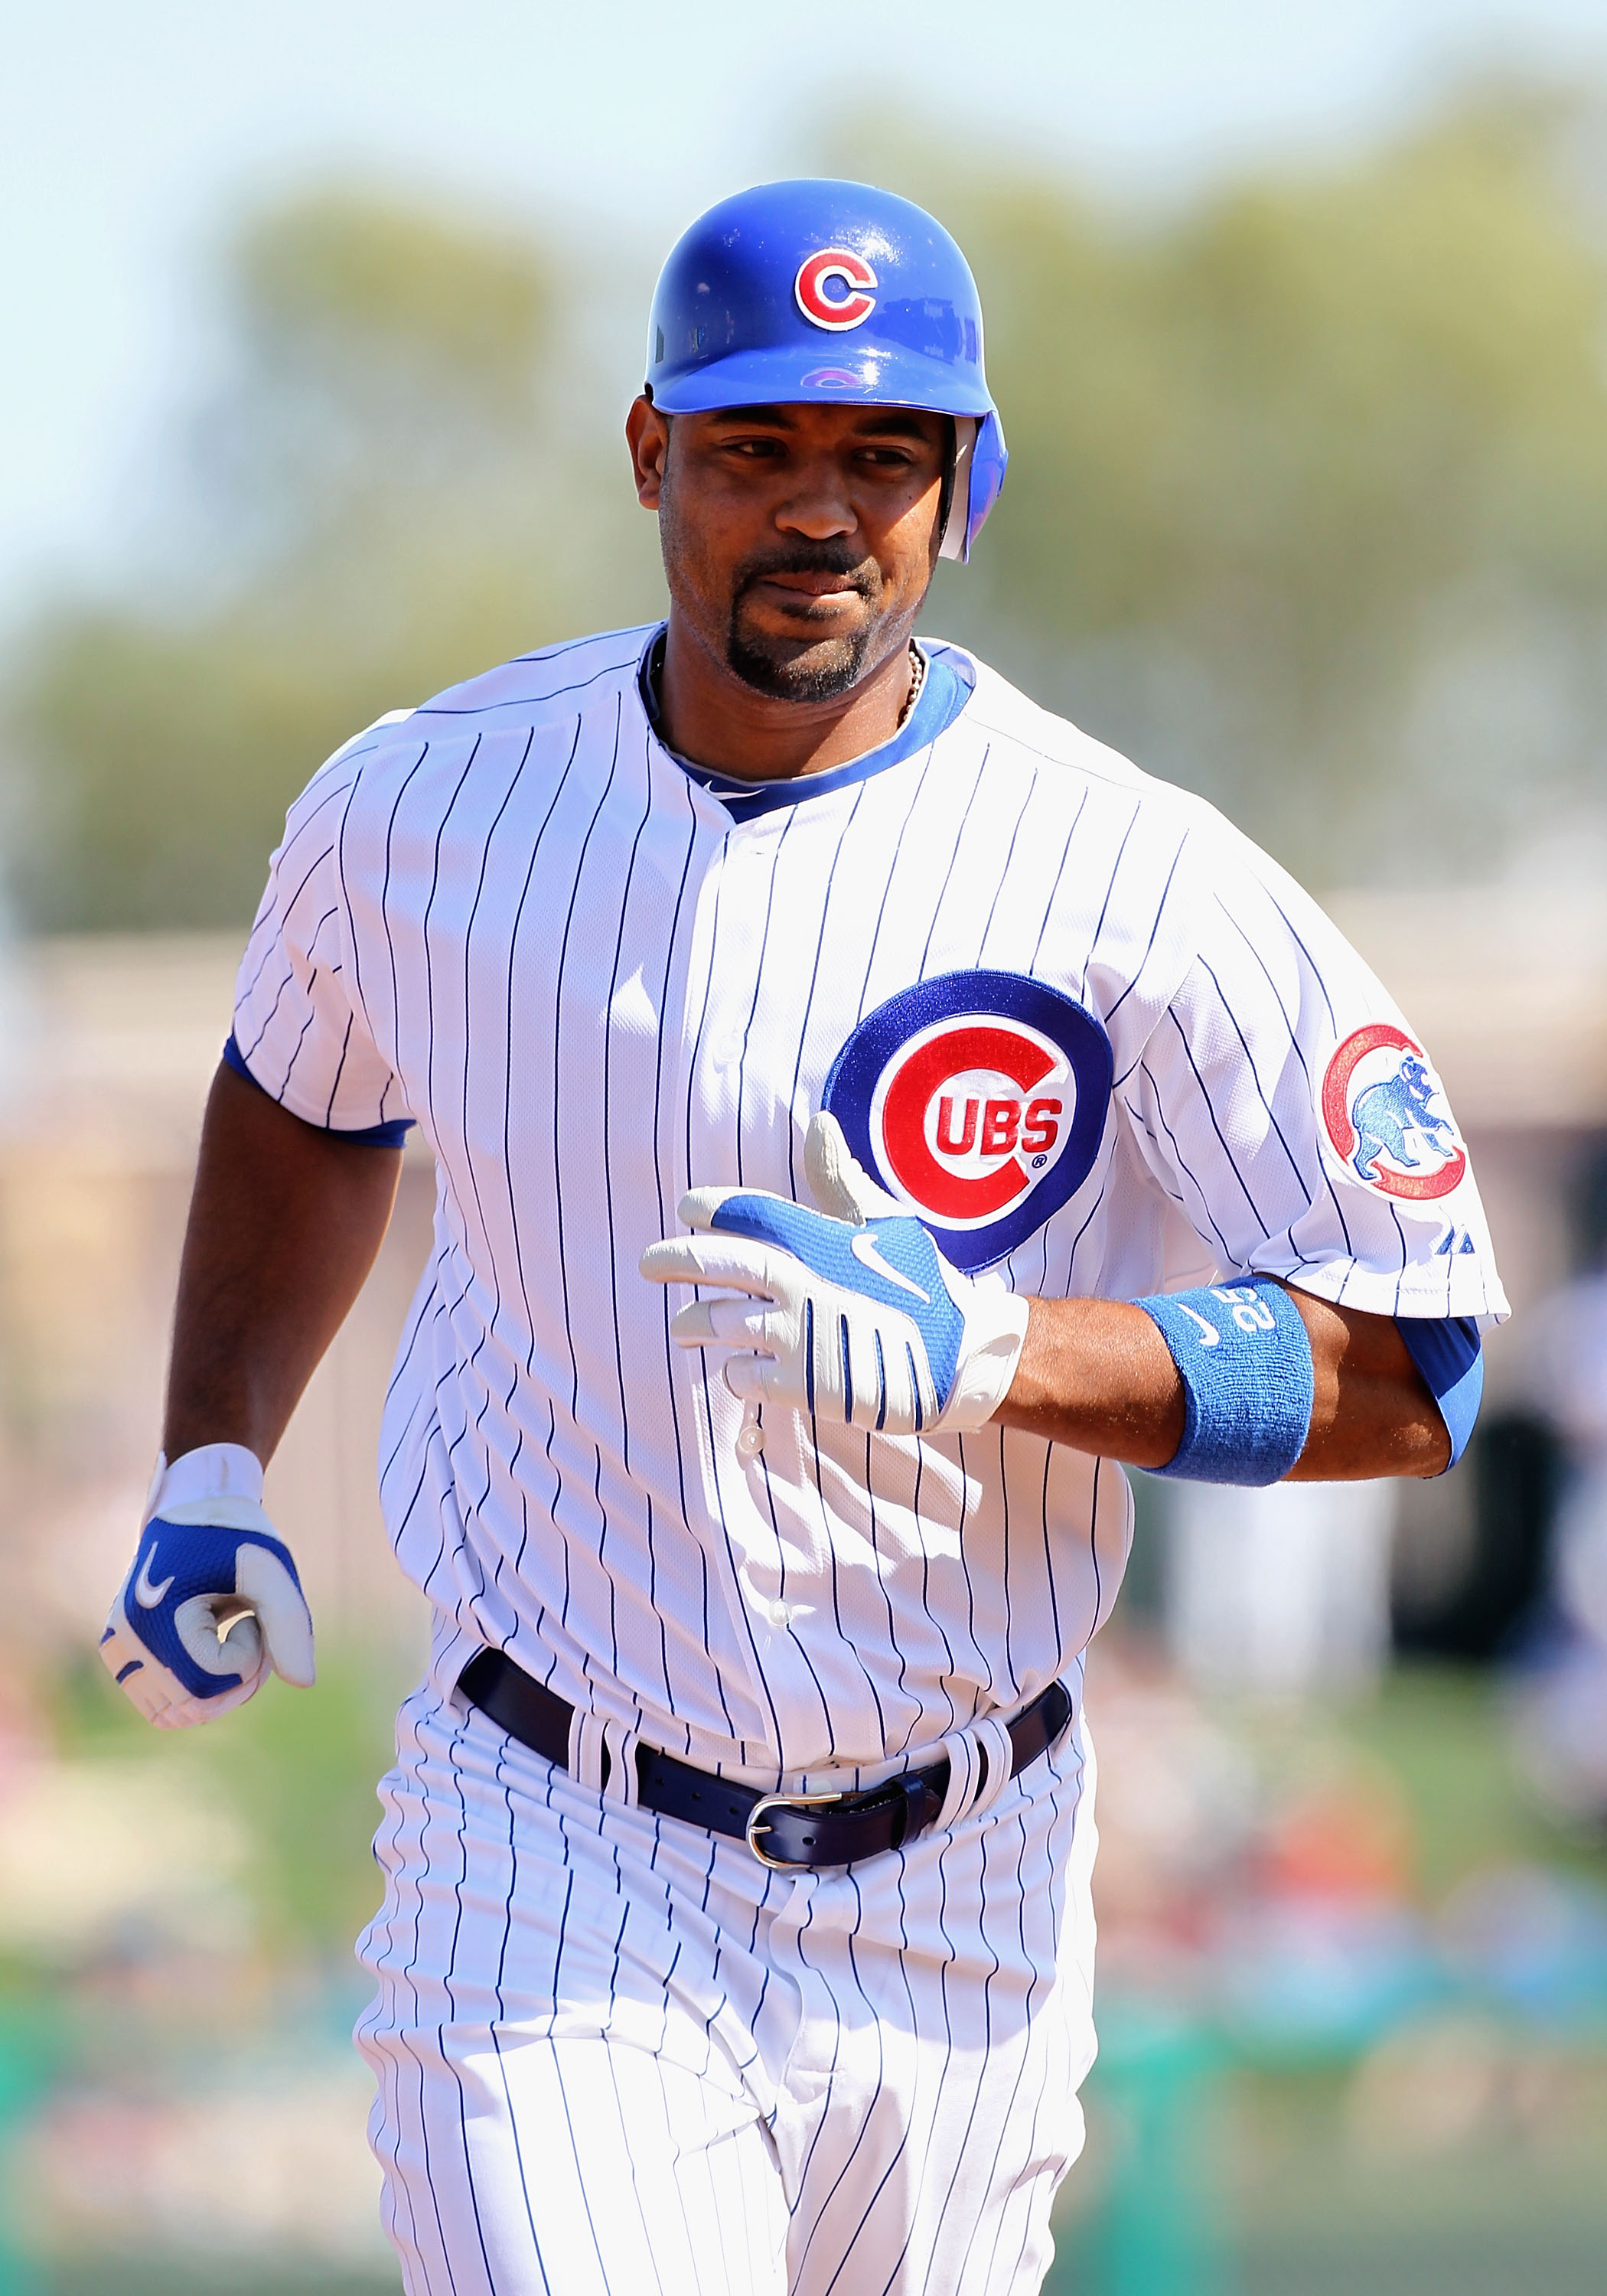 Braves acquire 1B Derrek Lee from Cubs - The San Diego Union-Tribune